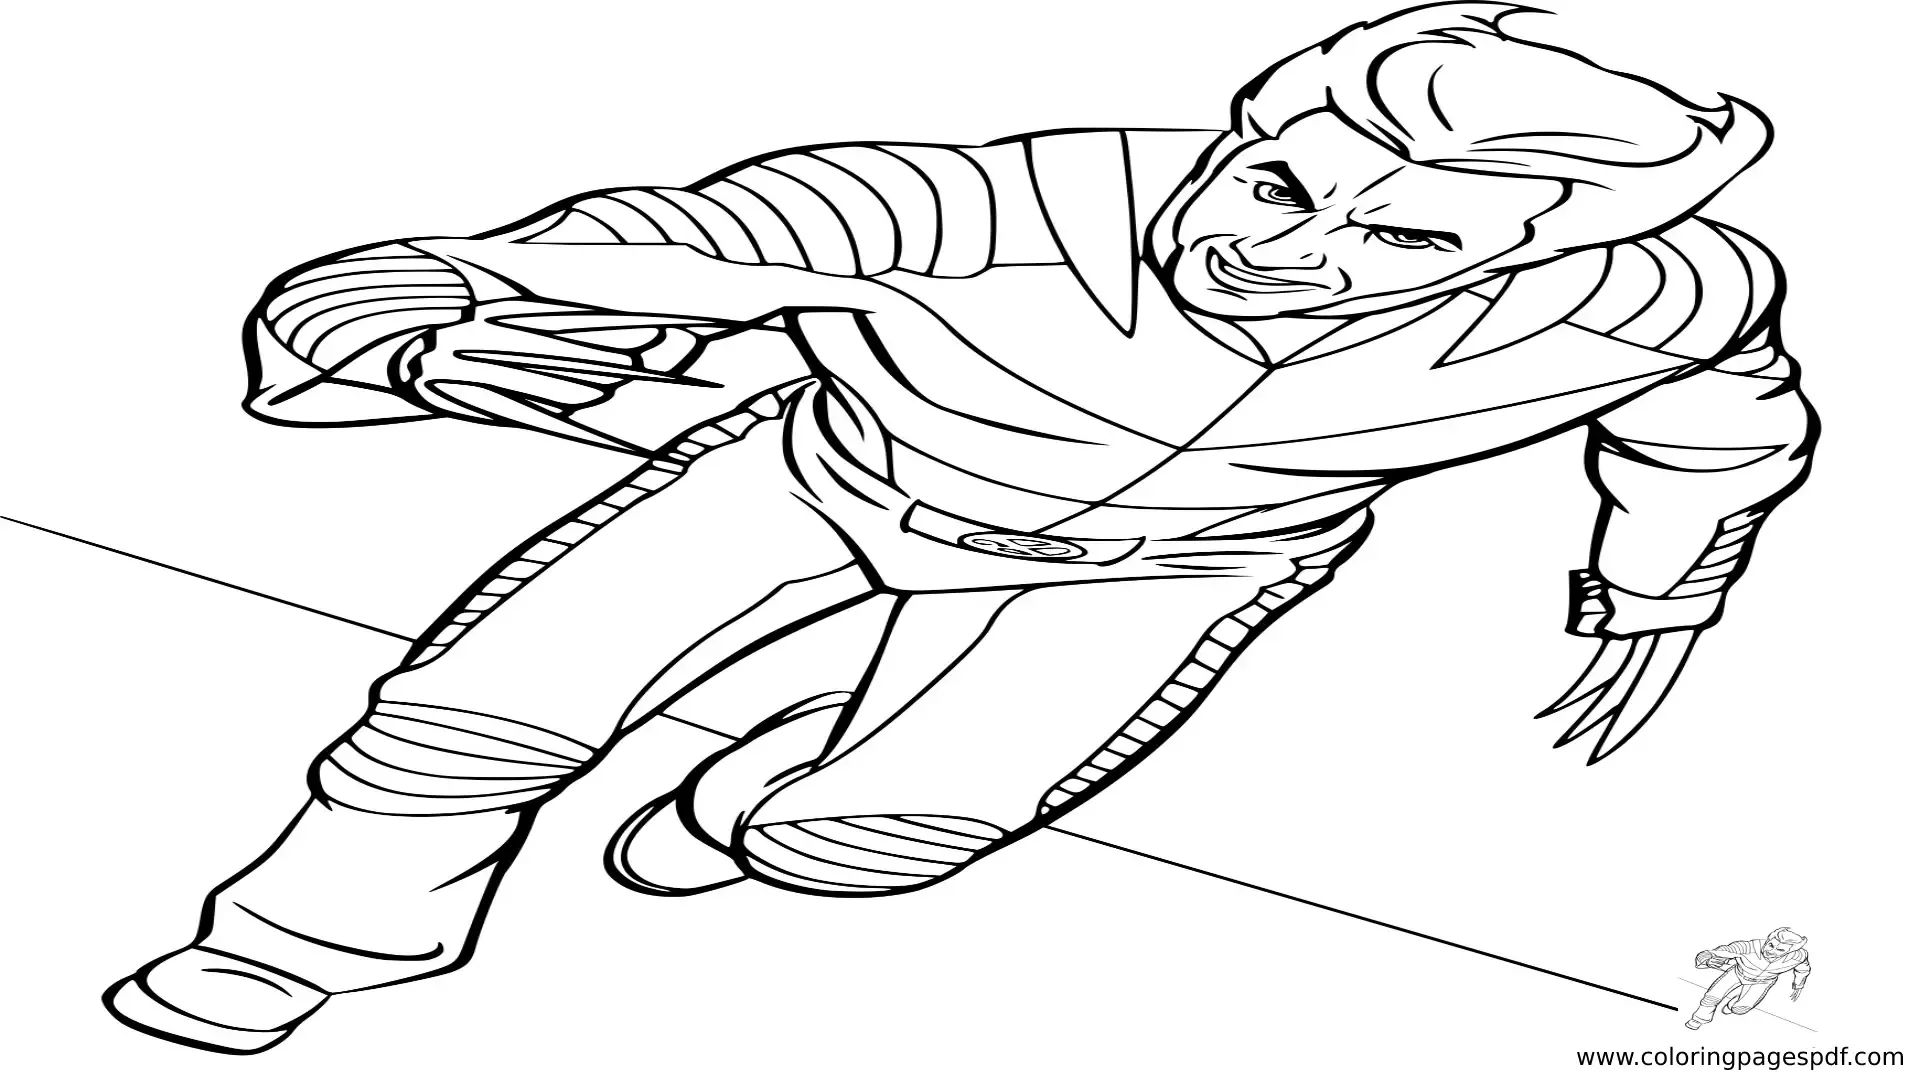 Coloring Pages Of Wolverine